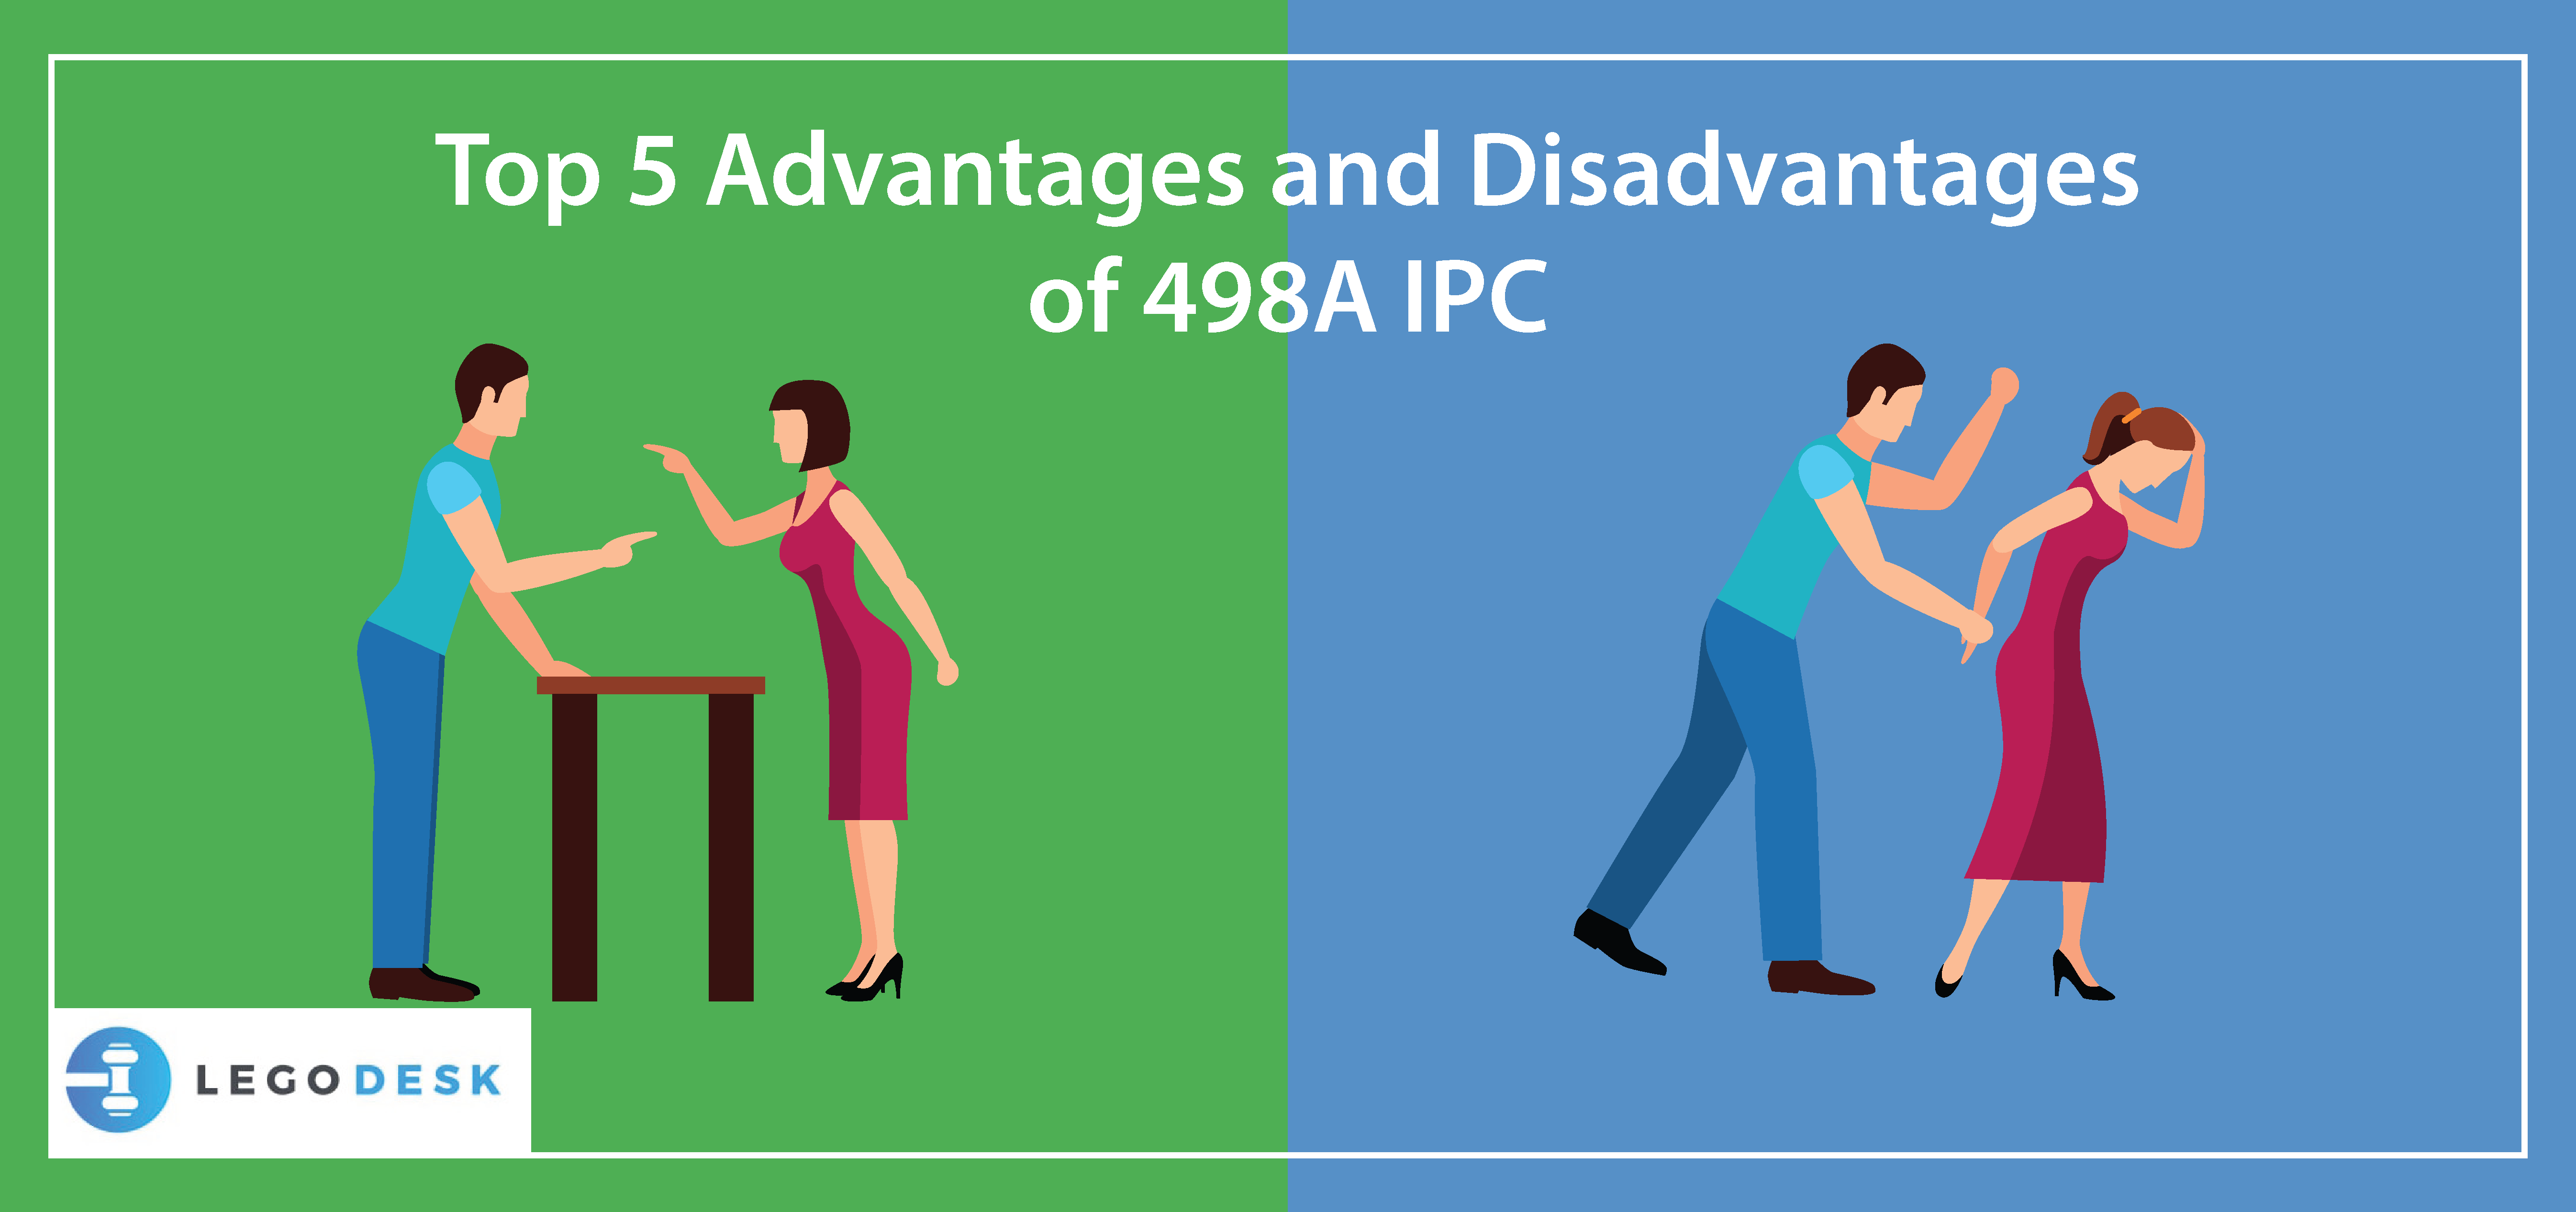 Top 5 Advantages and Disadvantages of Section 498A IPC